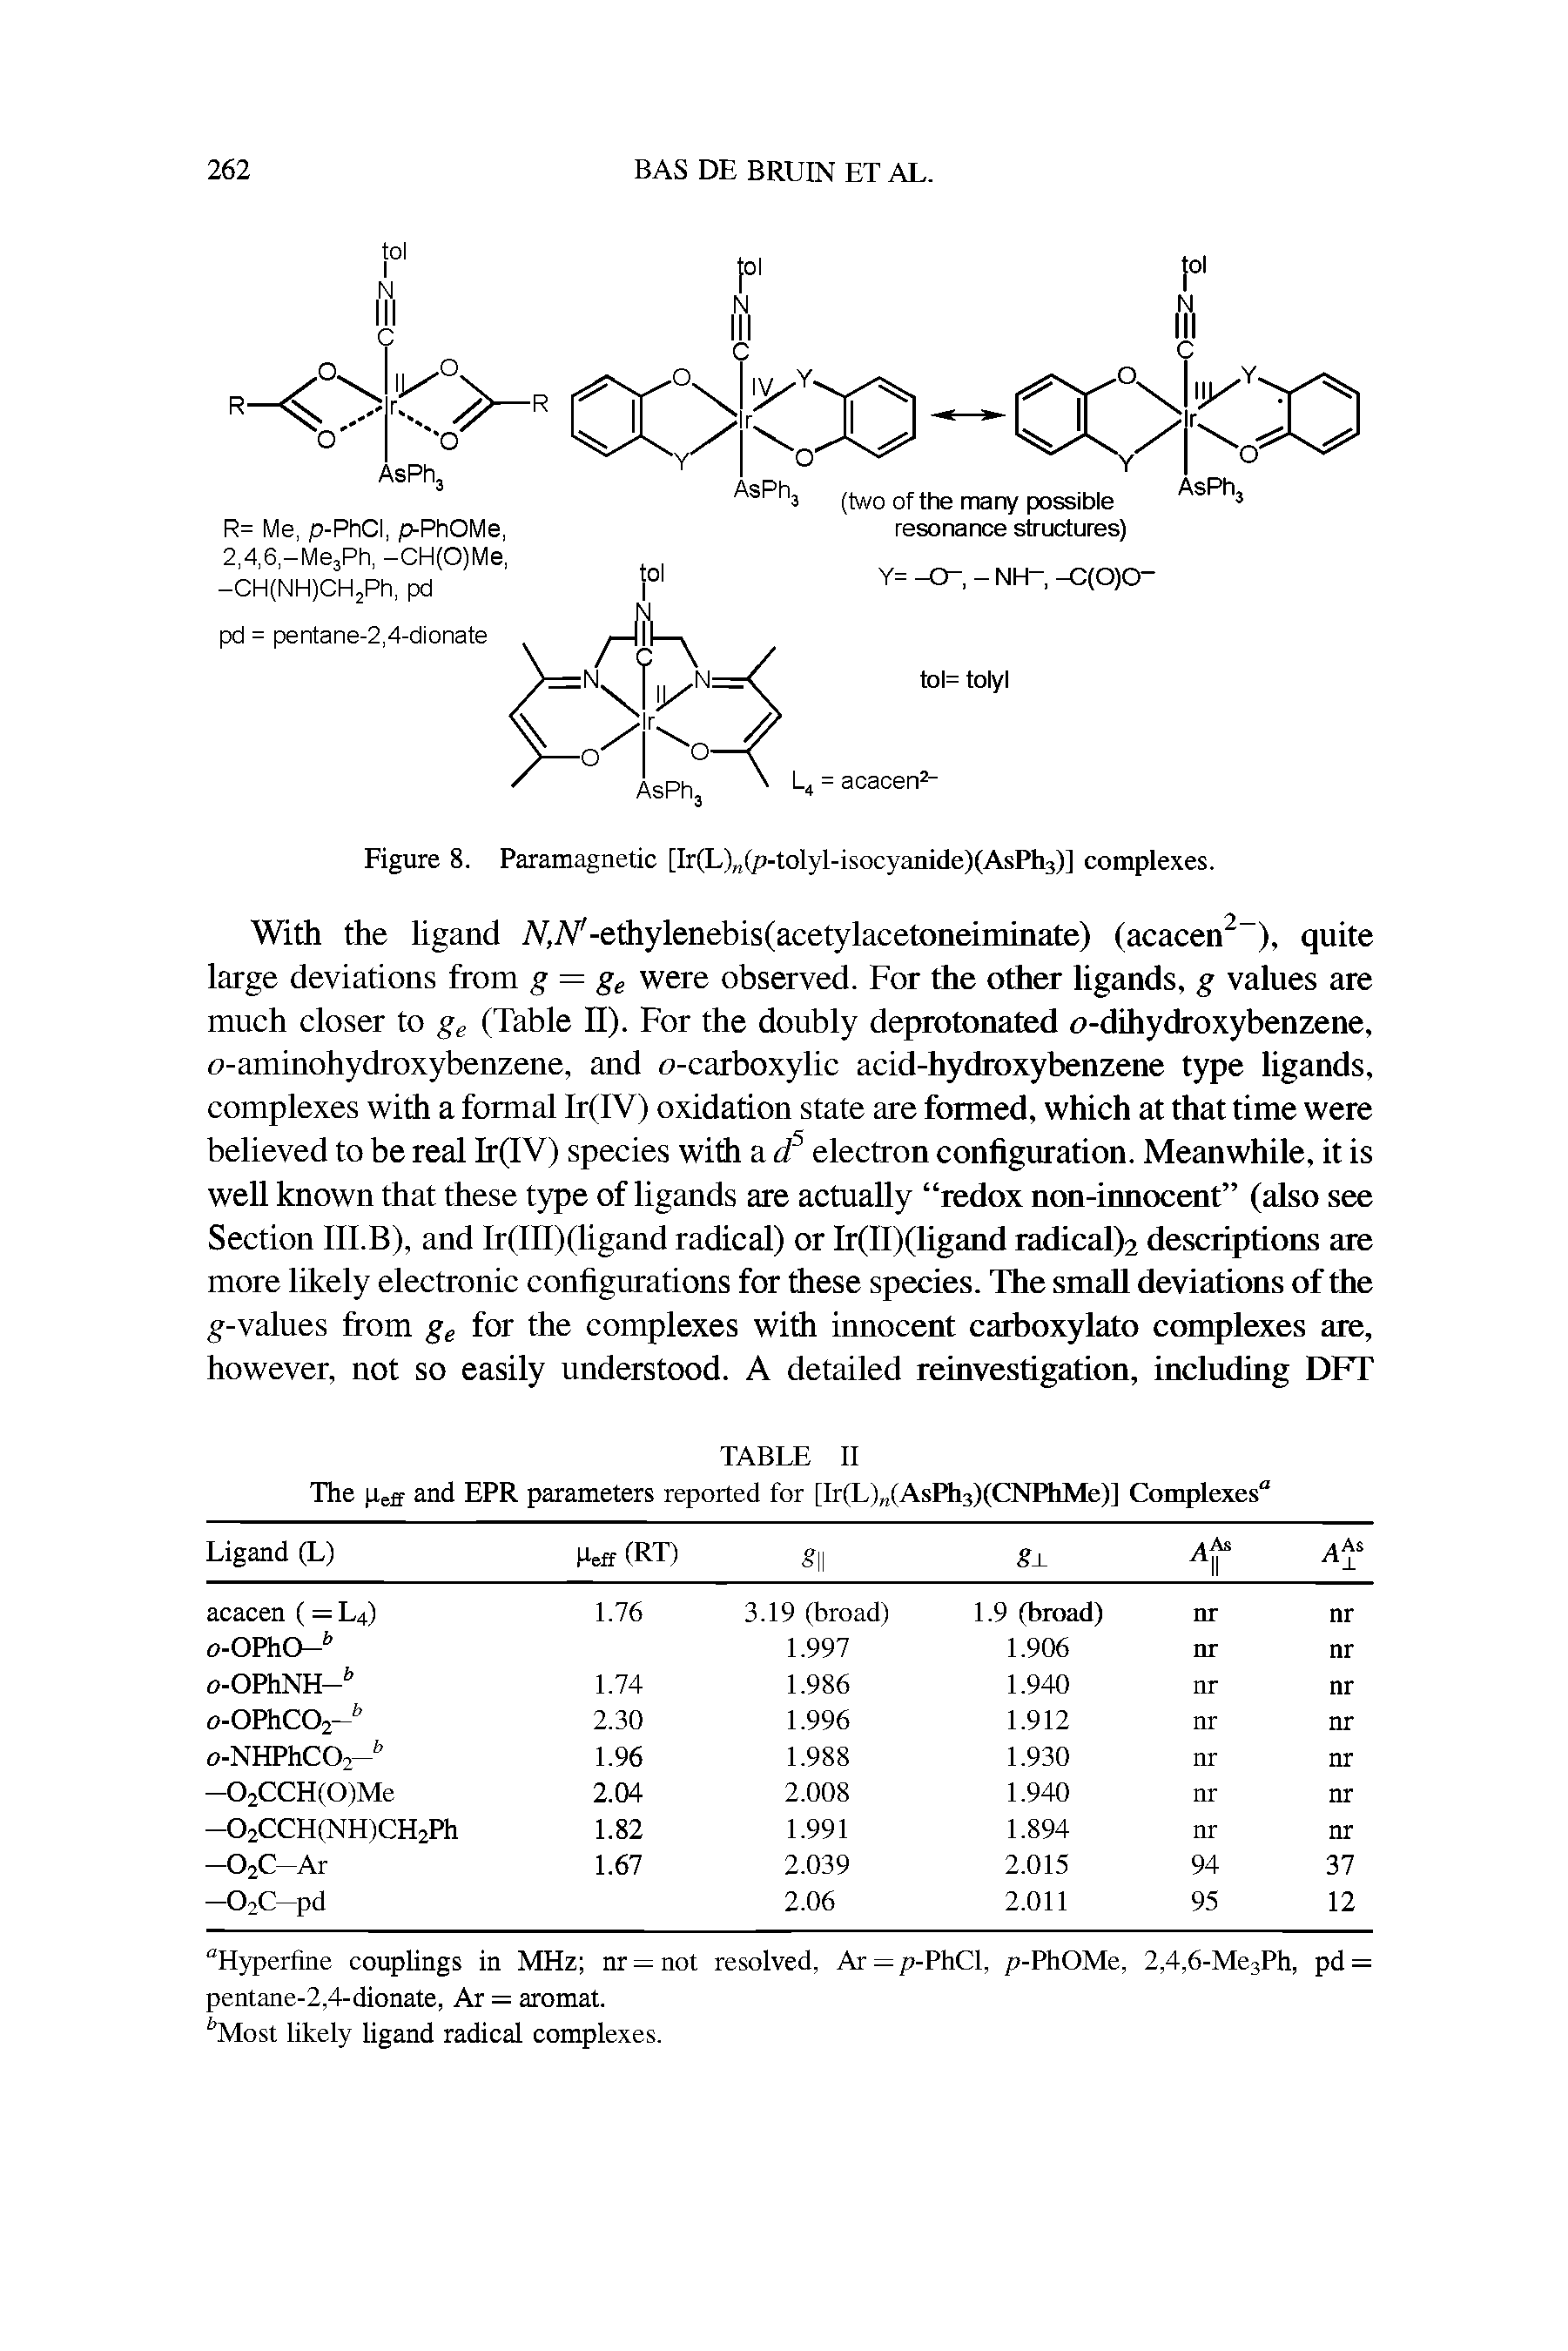 Figure 8. Paramagnetic [Ir(L) (p-tolyl-isocyanide)(AsPh3)] complexes.